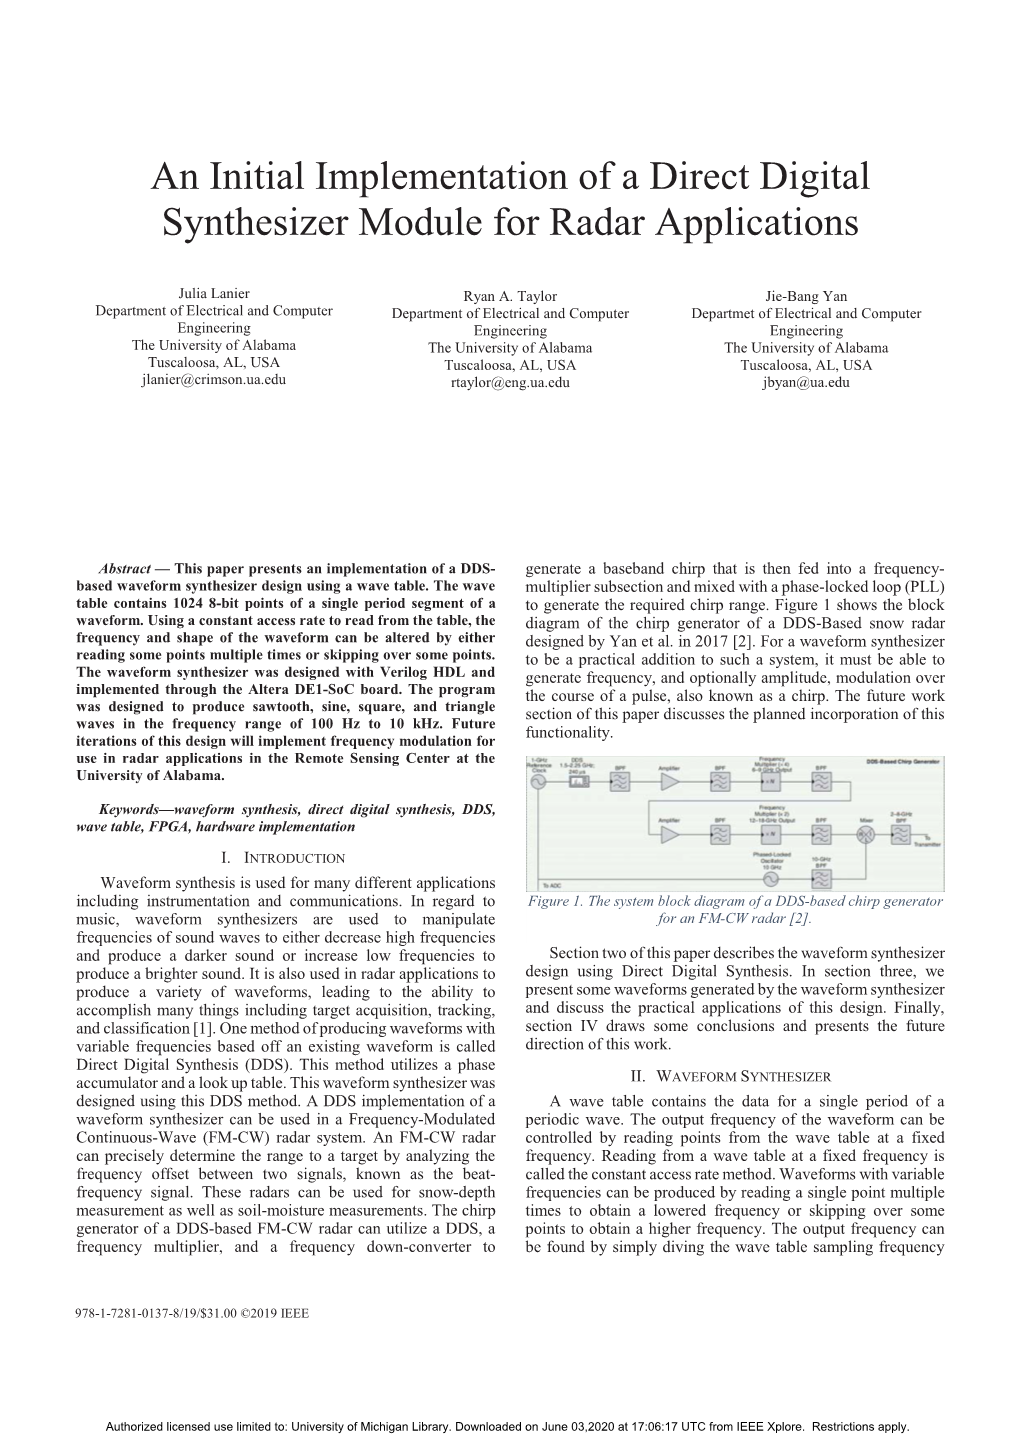 An Initial Implementation of a Direct Digital Synthesizer Module for Radar Applications